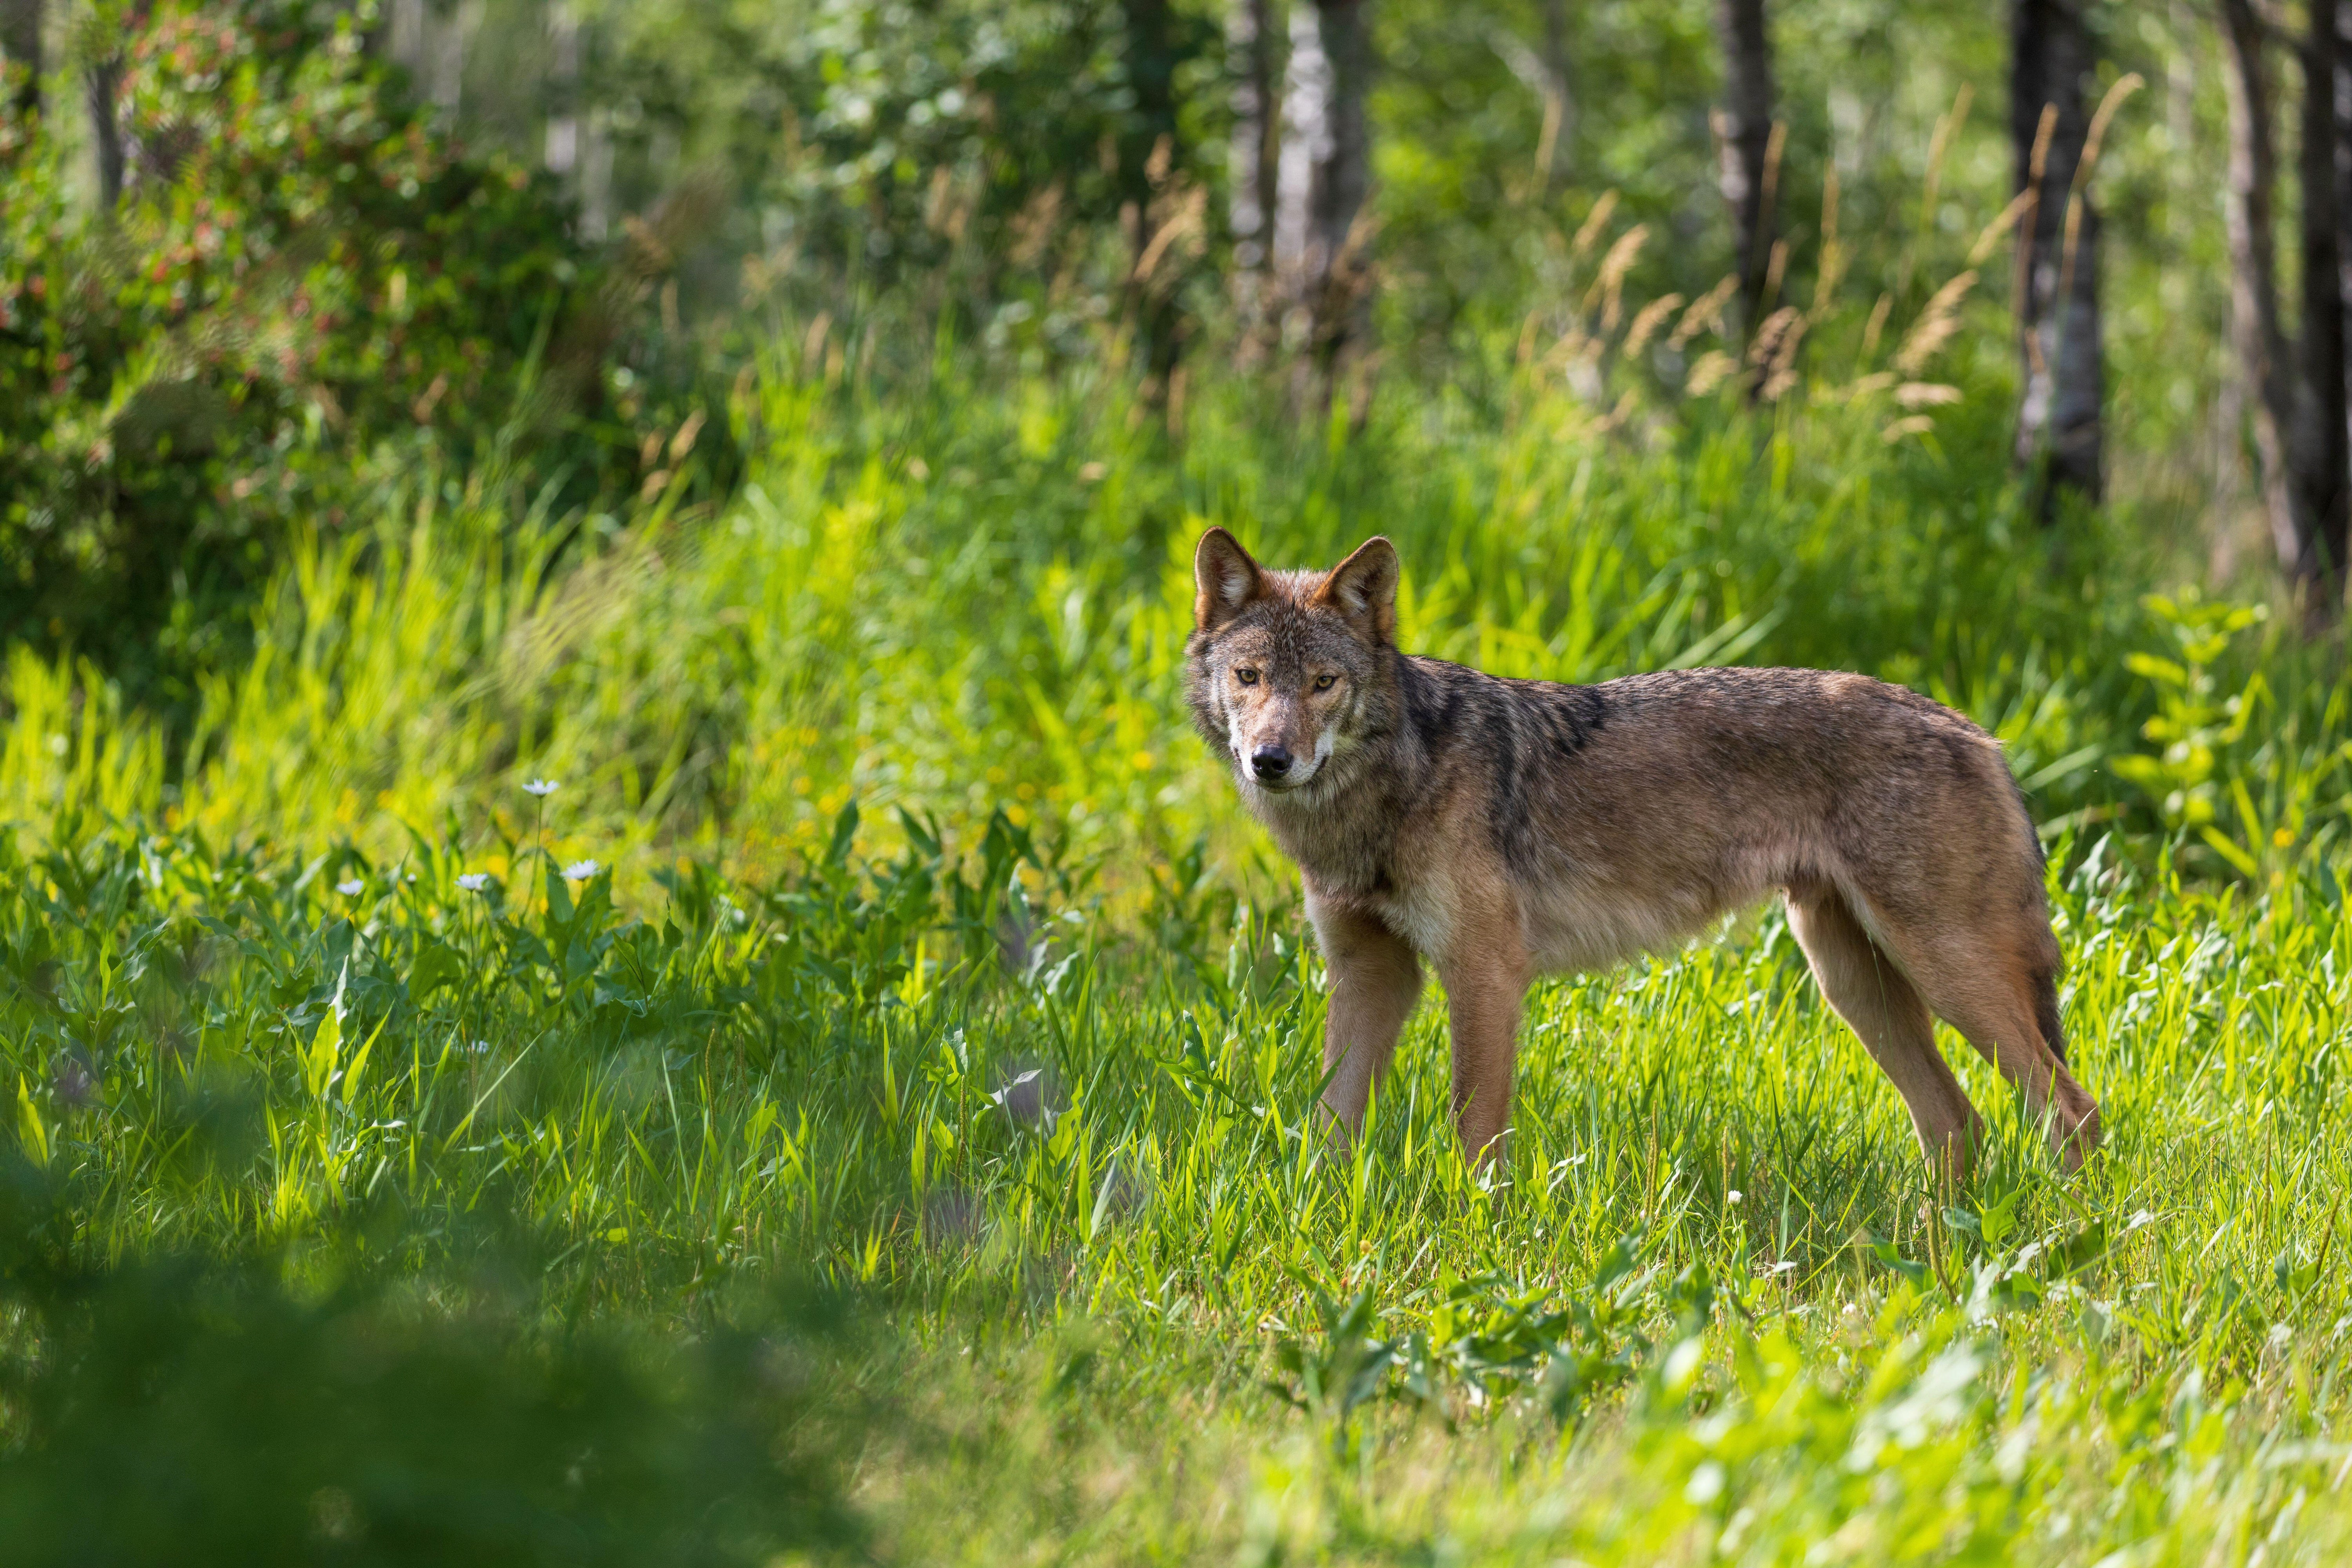 Wolf Populations Drop as More States Allow Hunting - Scientific American